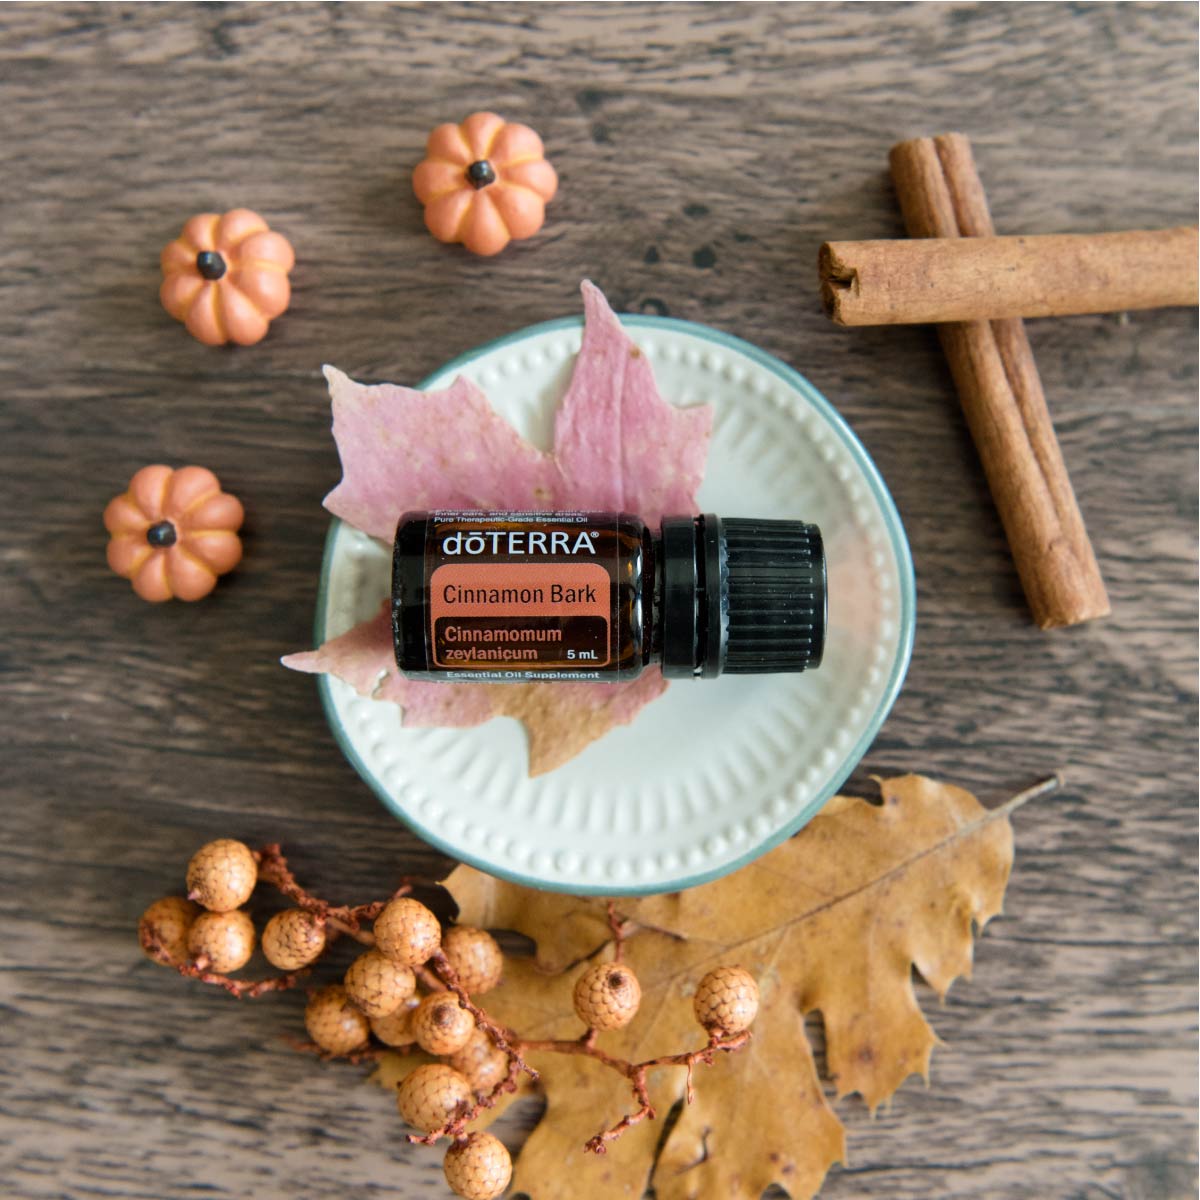 Bottle of Cinnamon essential oil next to fHow can I use Cinnamon essential oil? Cinnamon oil can be used to add flavor to food, for household cleaning, to create a soothing massage, and more.